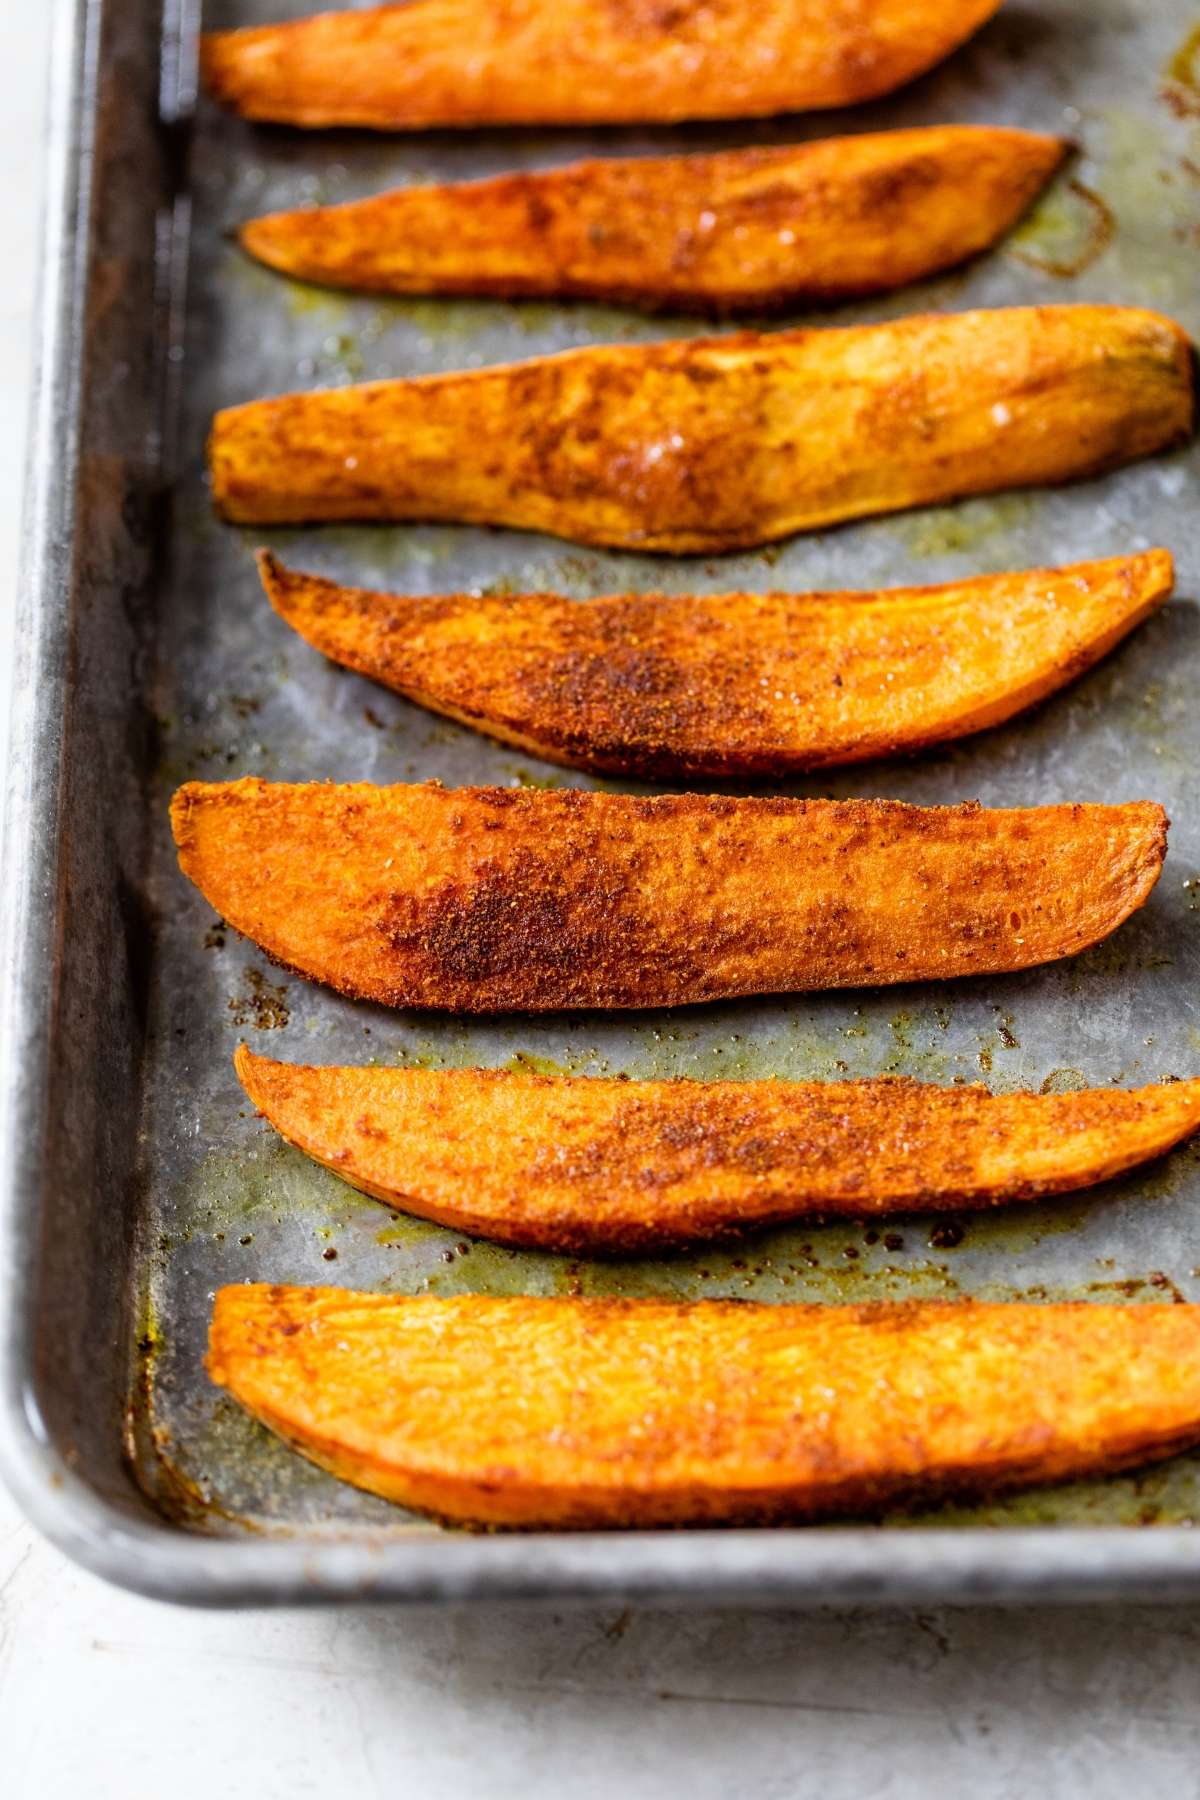 Roasted sweet potato wedges on a pan.